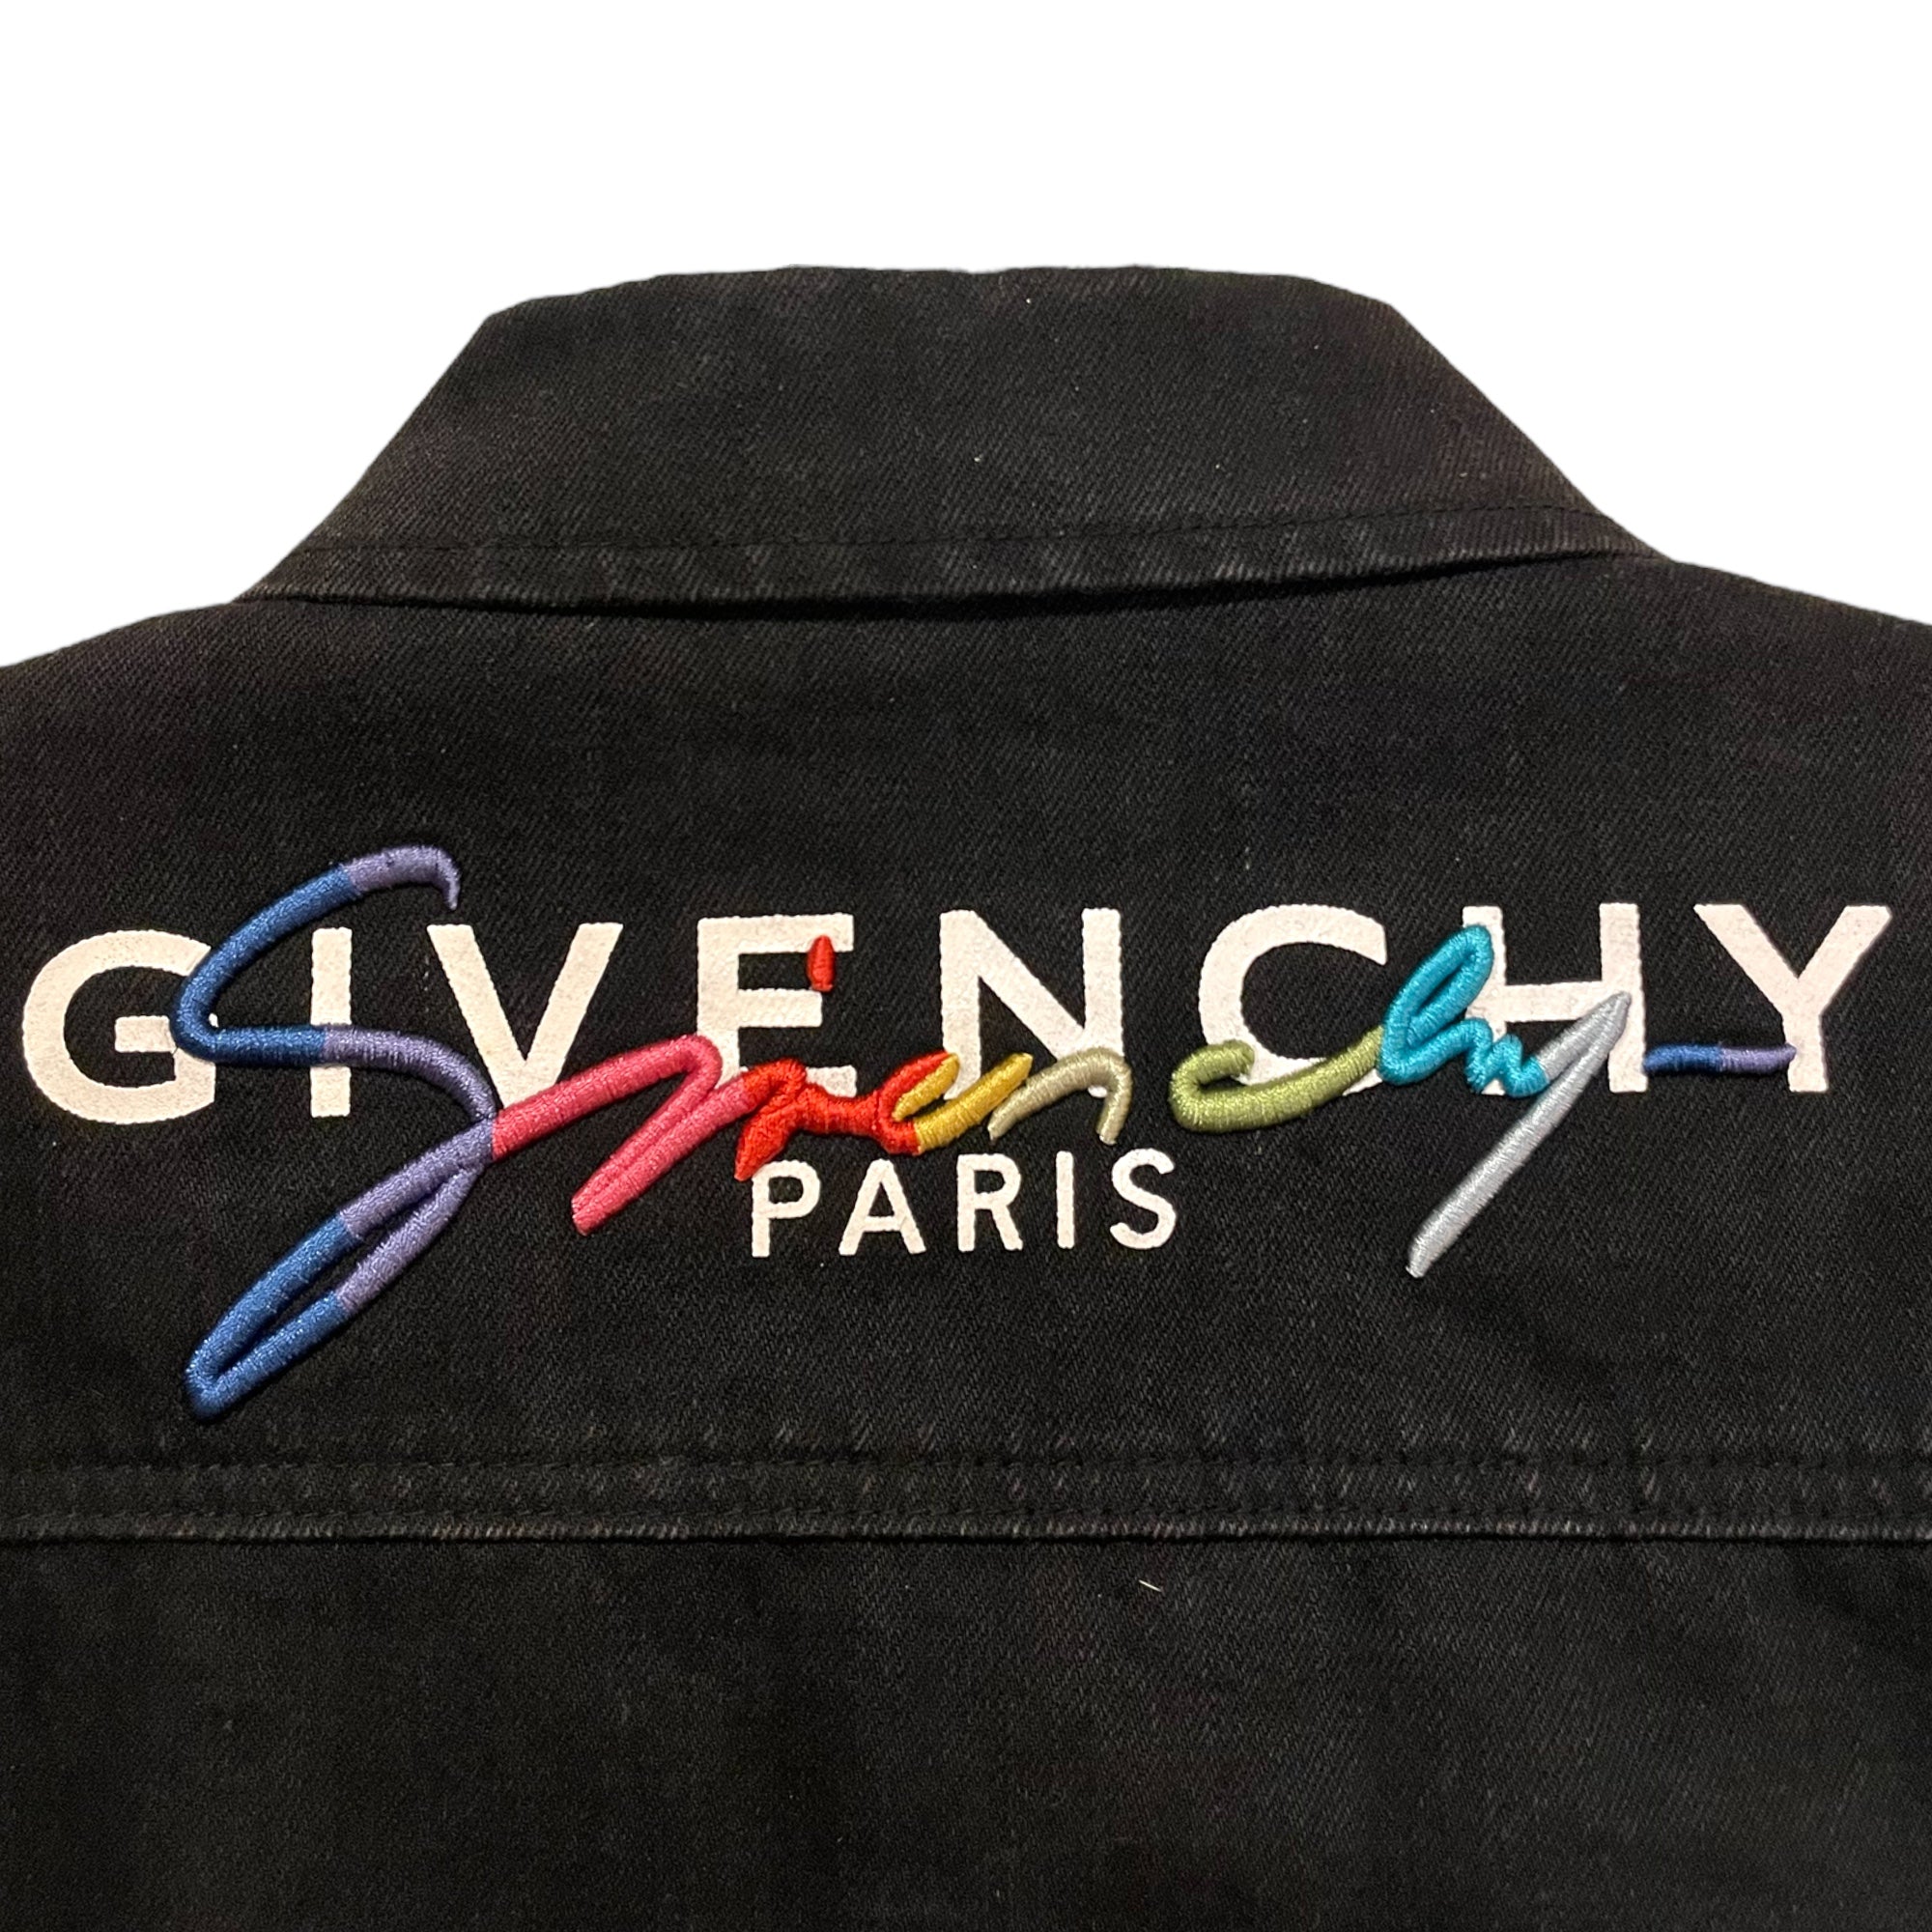 Men's Denim Embroidered Logo Jacket |Size: XL| Made in Italy